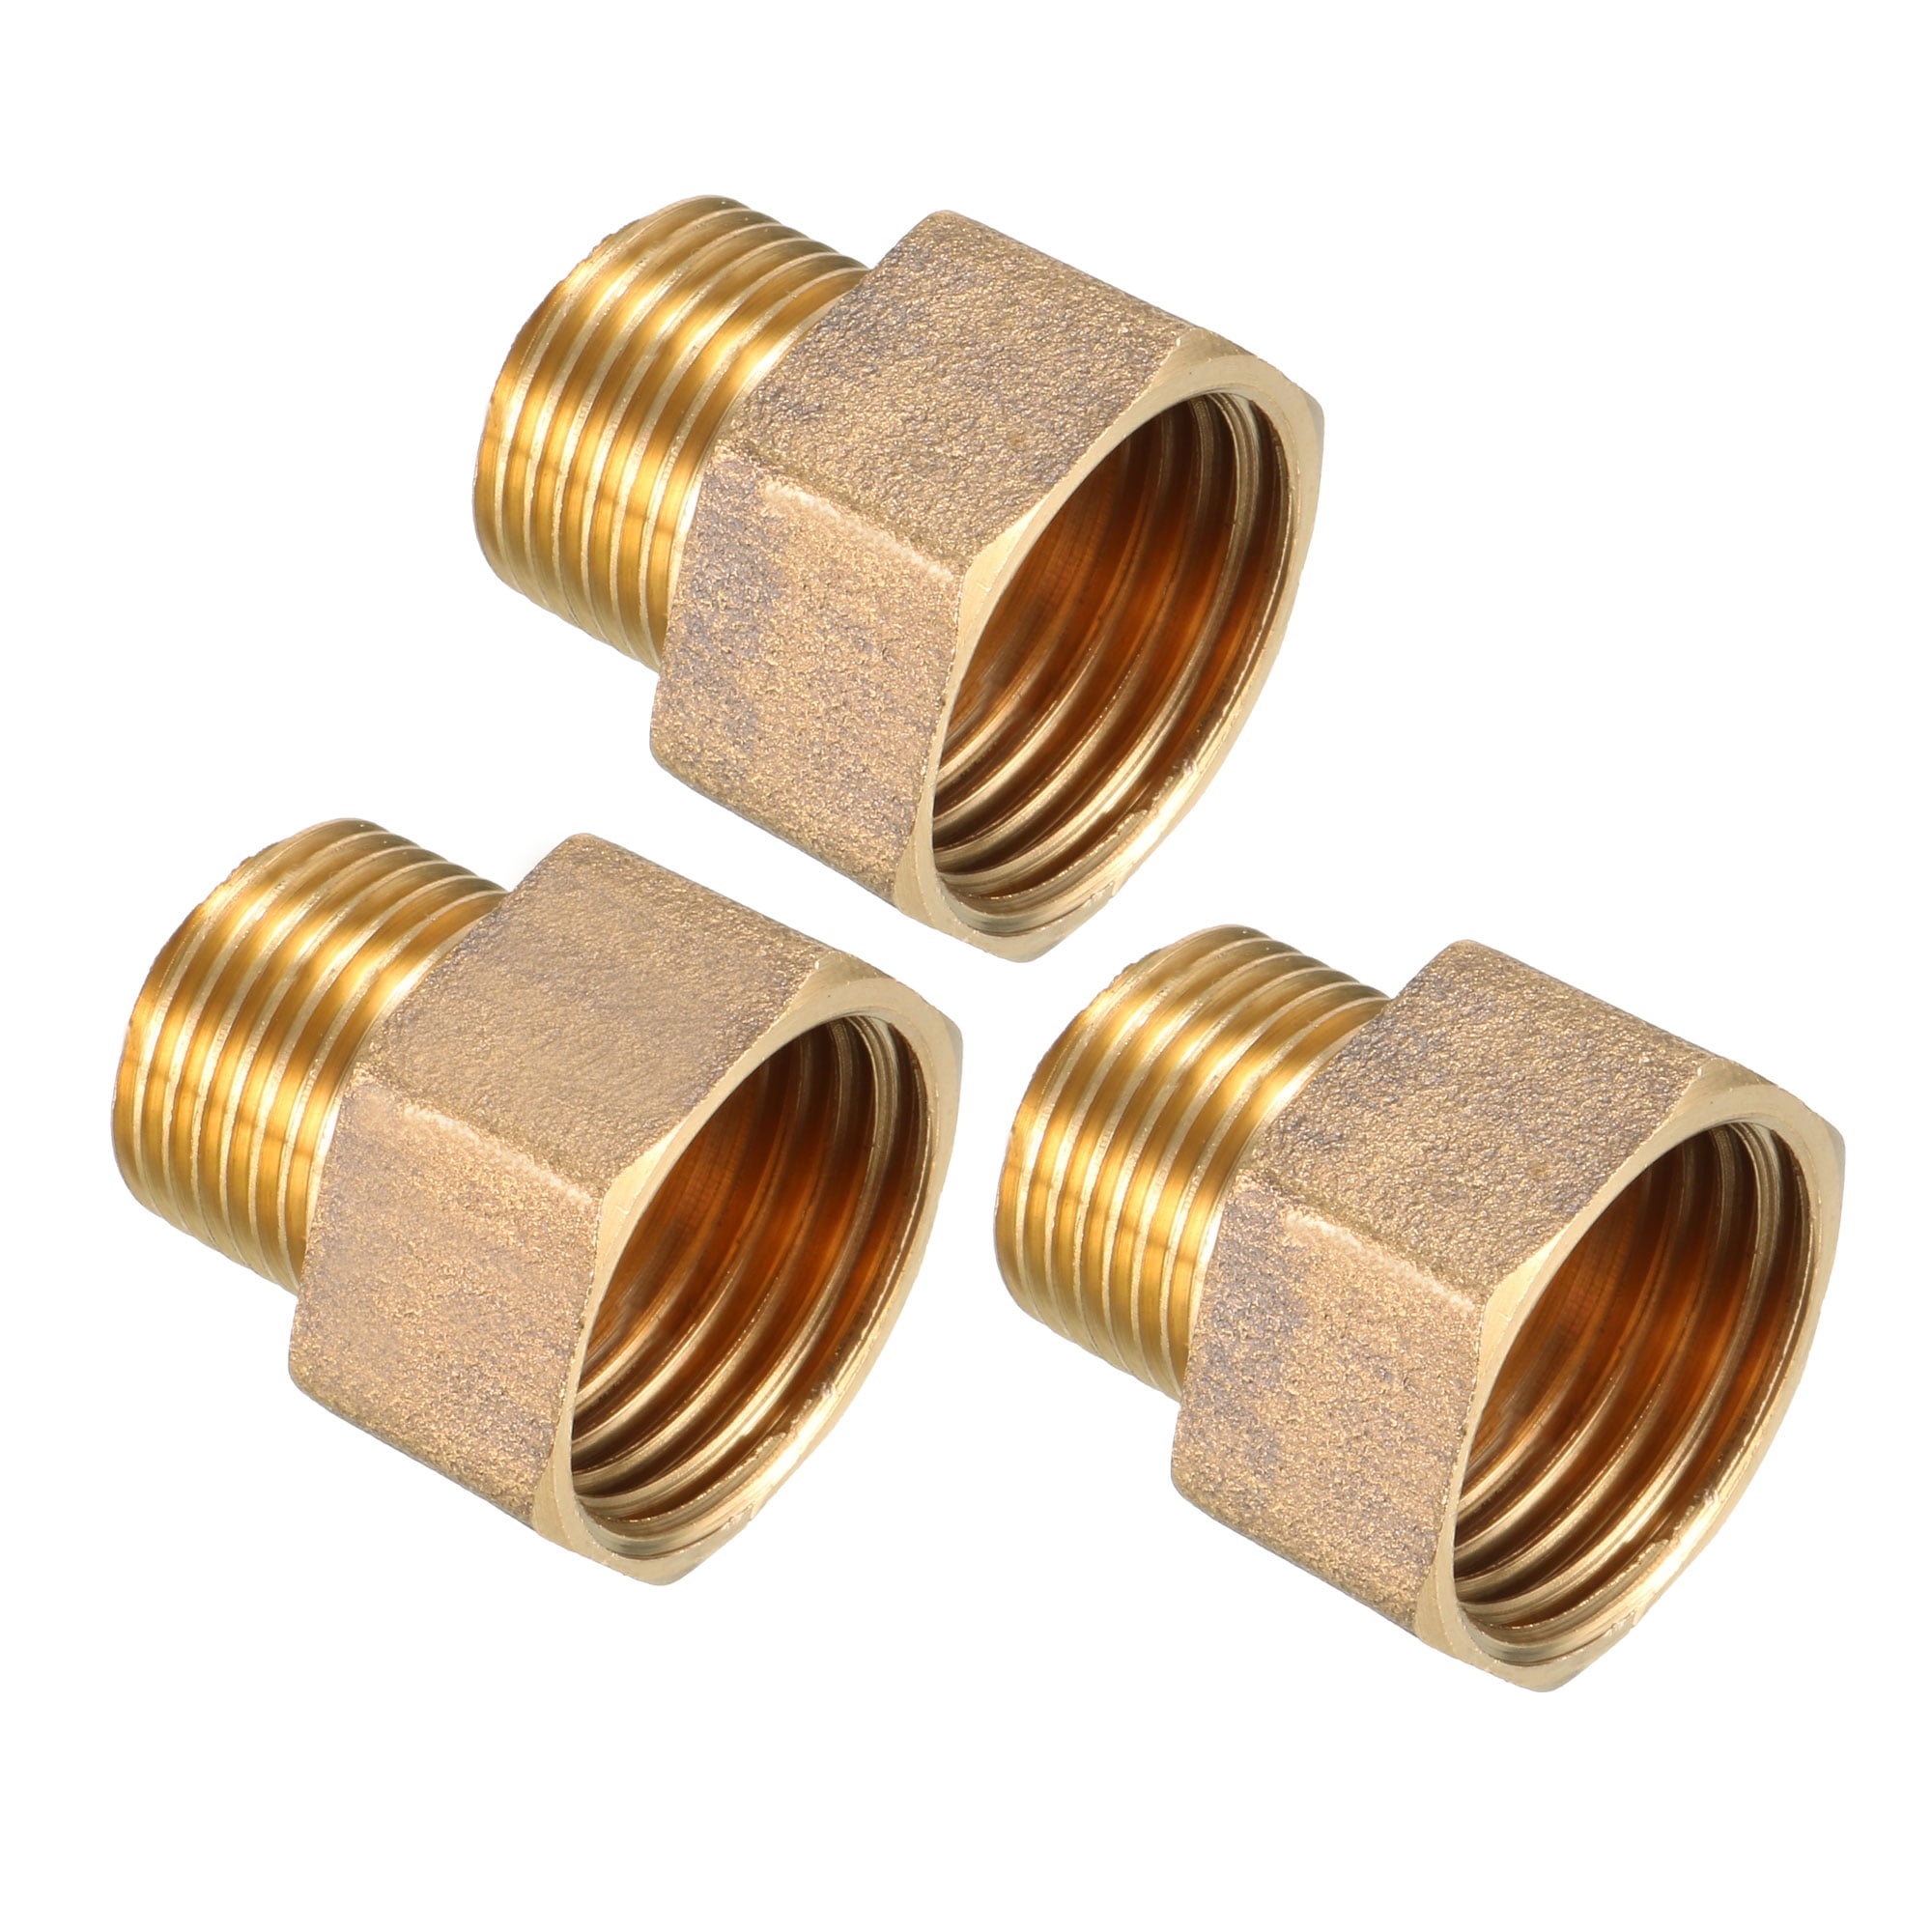 Full Brass G3/8" Male x G1/2" Female Thread Adapter Connector Pipe Fitting 